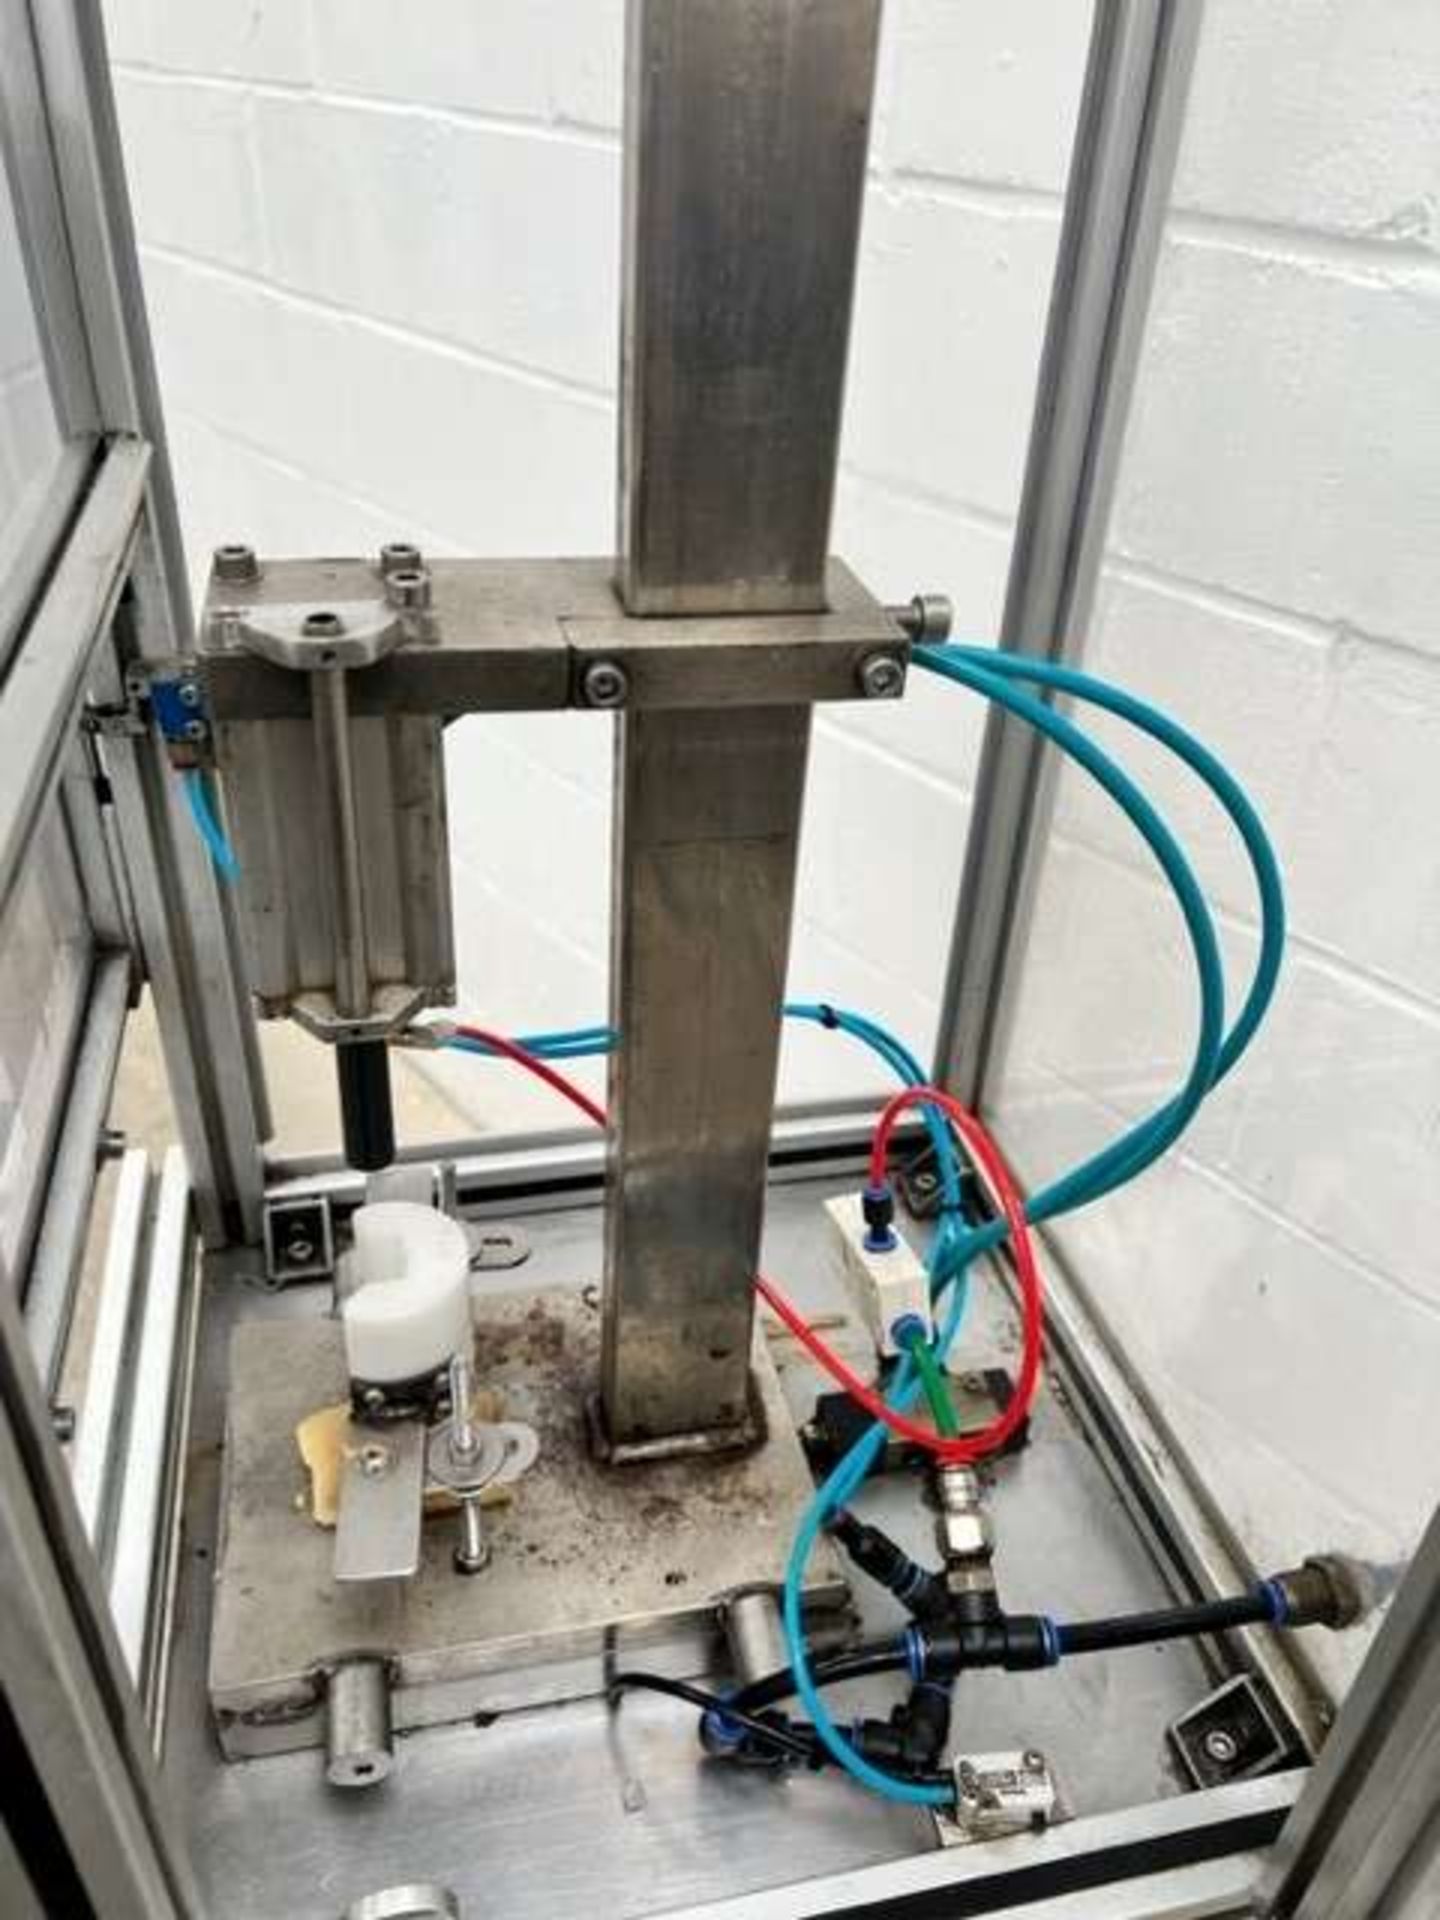 Semi Automatic Single Head Aerosol Capper with Stand and Guarding - Image 5 of 6